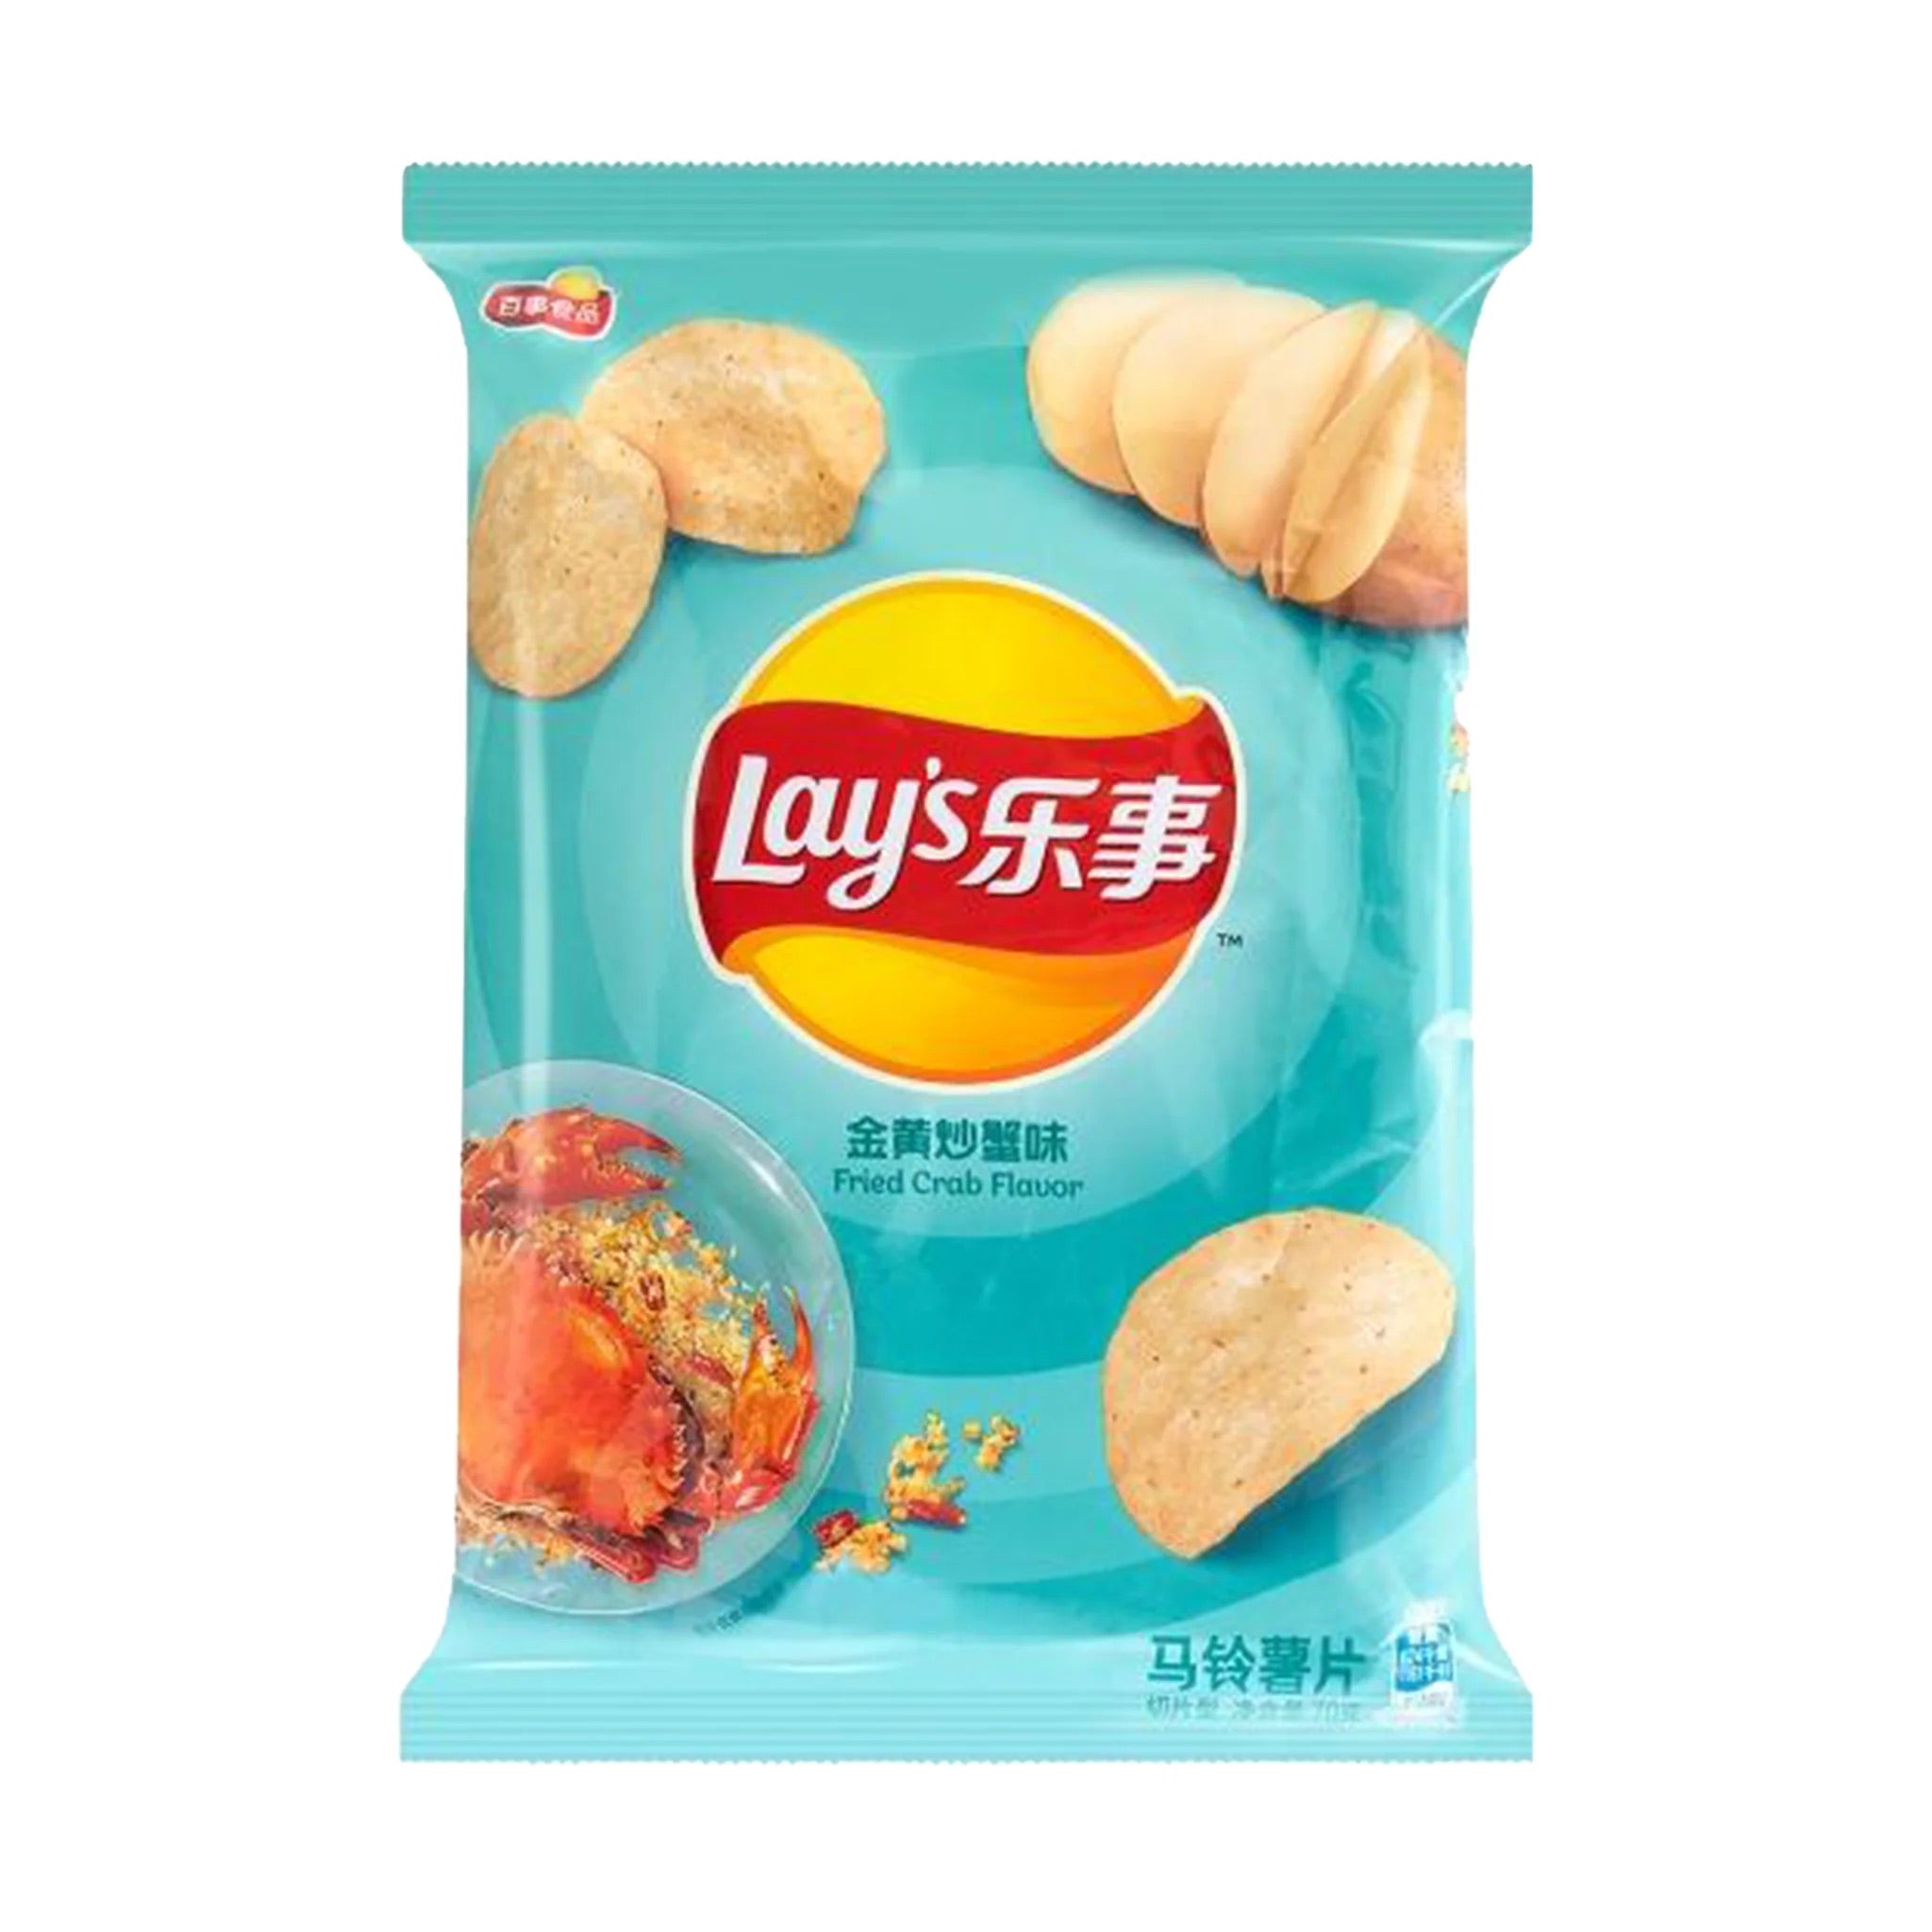 Lay’s fried crab